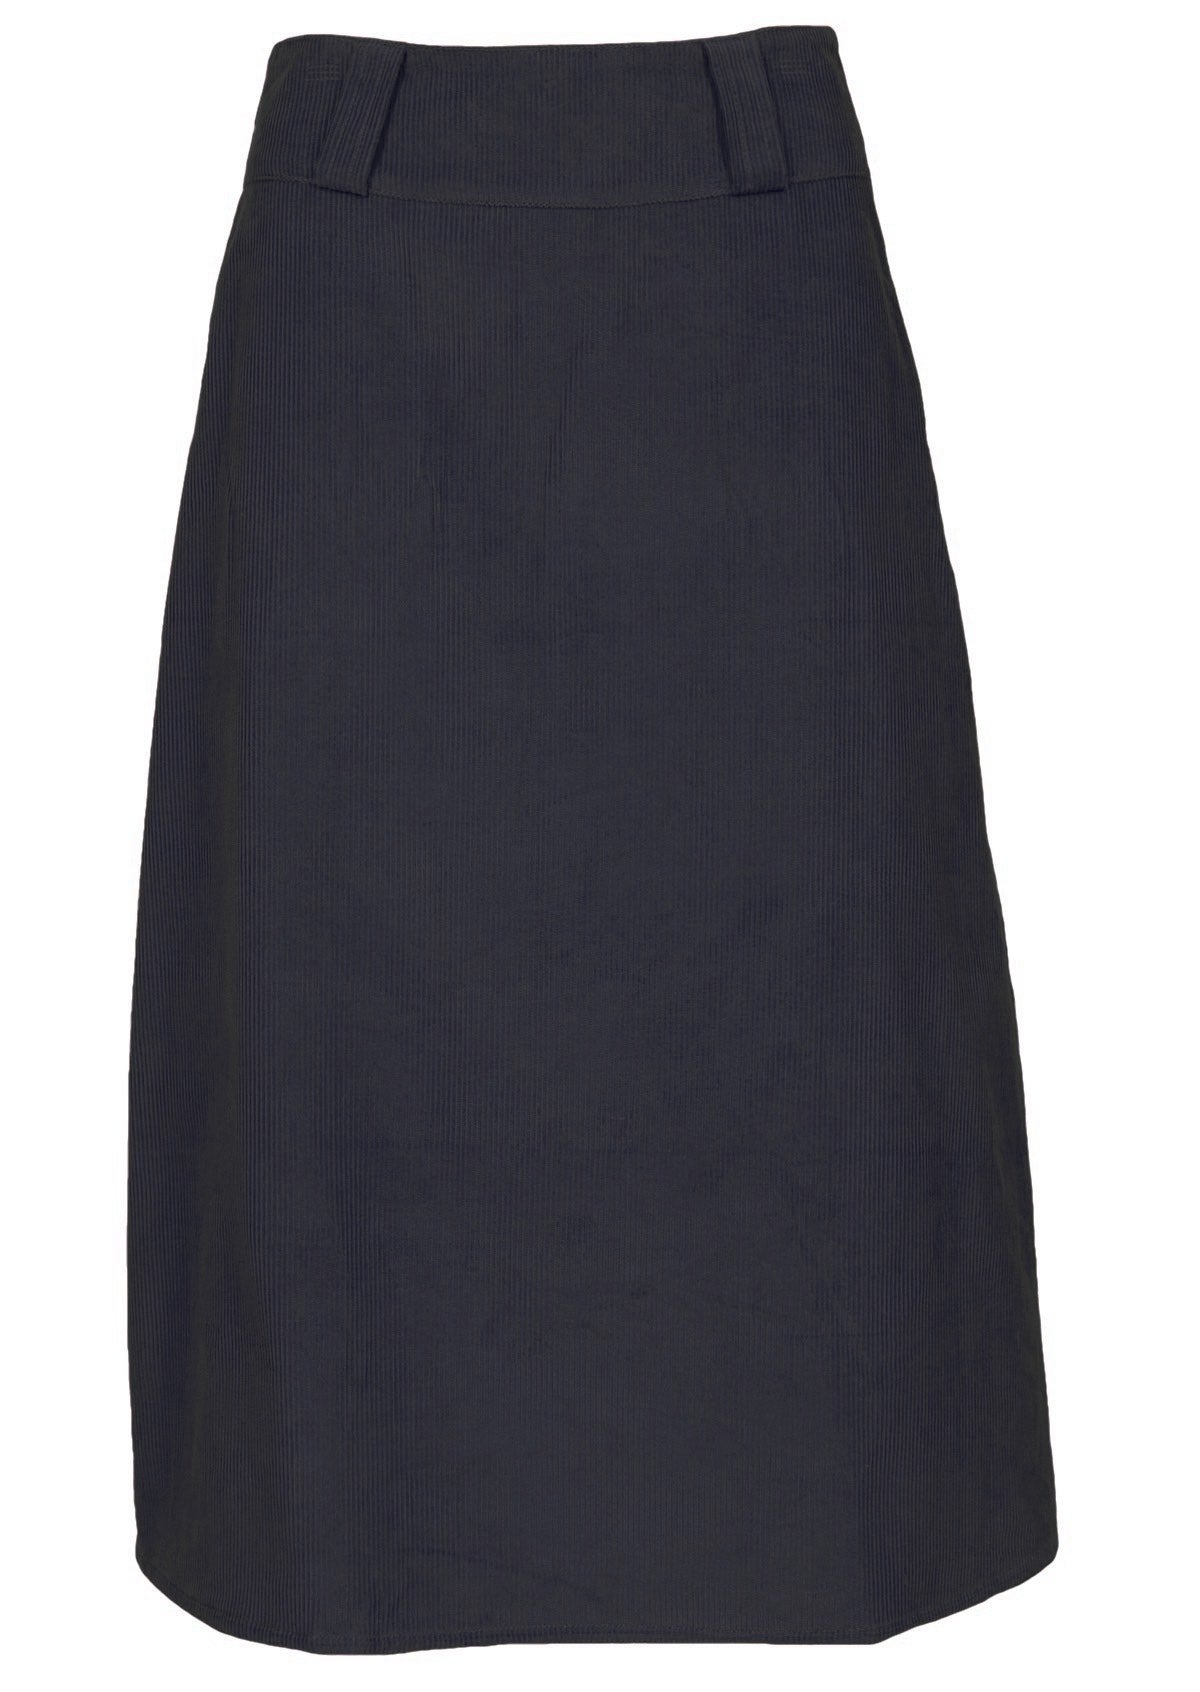 Greyish-blue 100% cotton corduroy skirt with a side zip. 